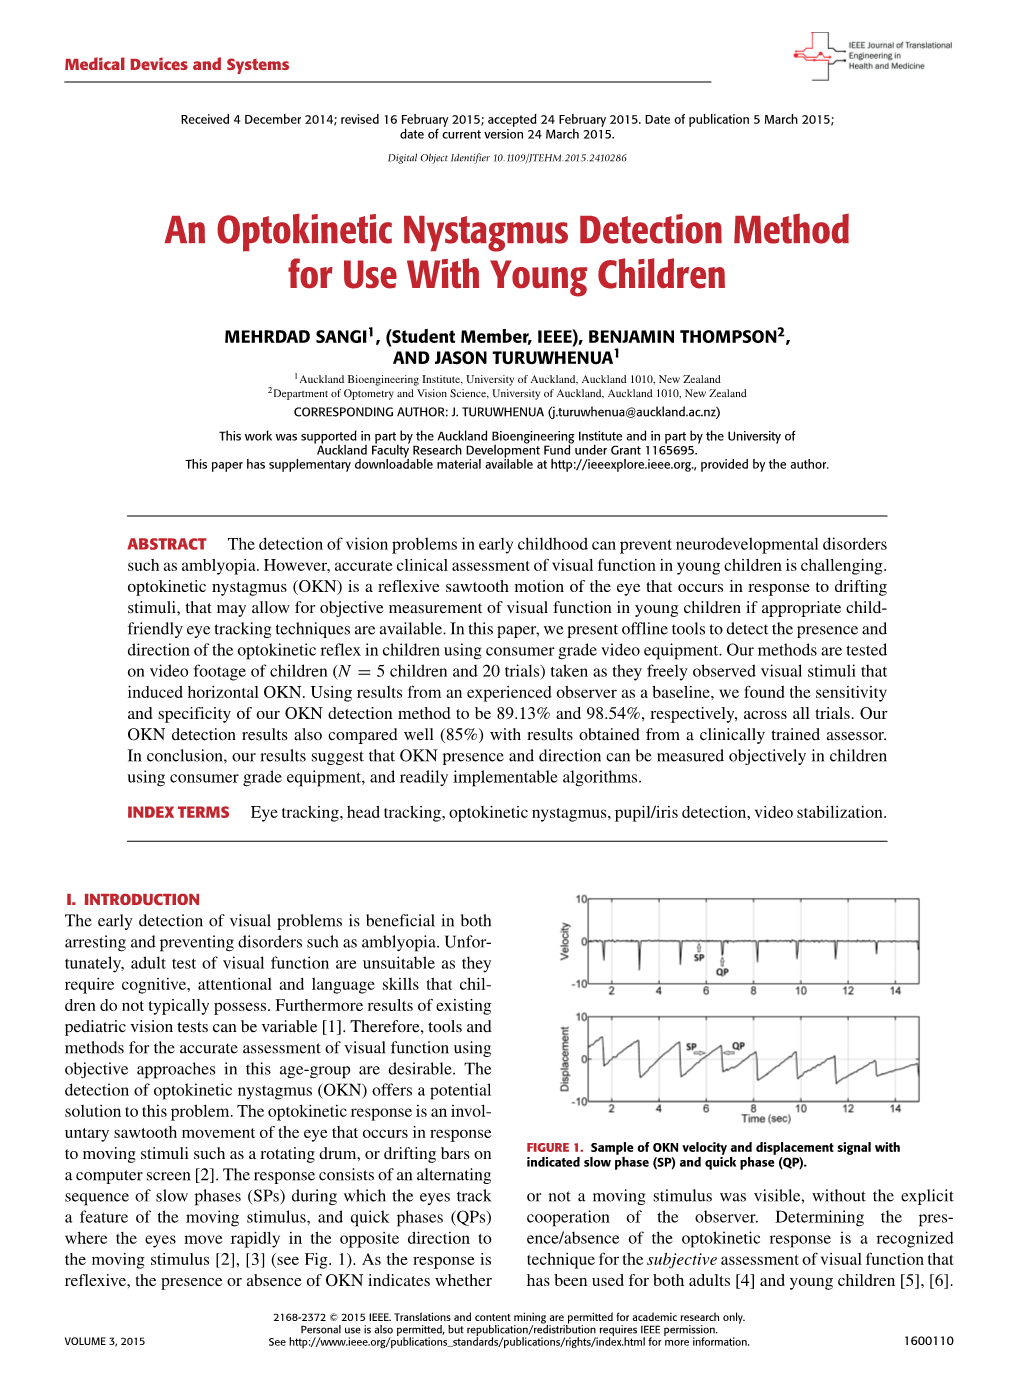 An Optokinetic Nystagmus Detection Method for Use with Young Children